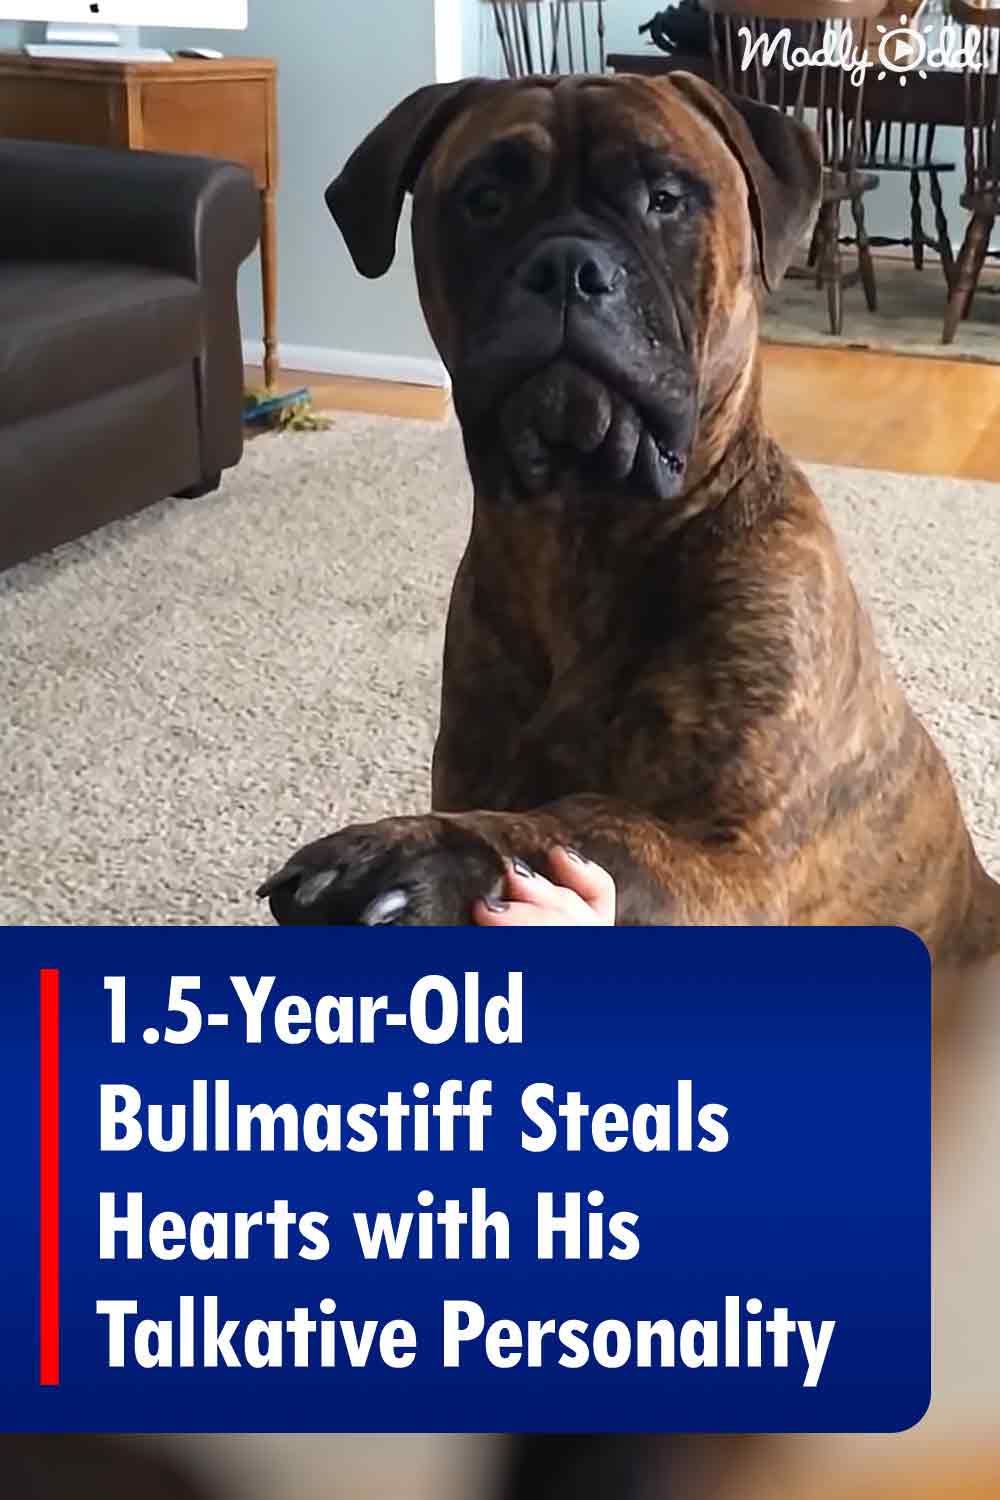 1.5-Year-Old Bullmastiff Steals Hearts with His Talkative Personality